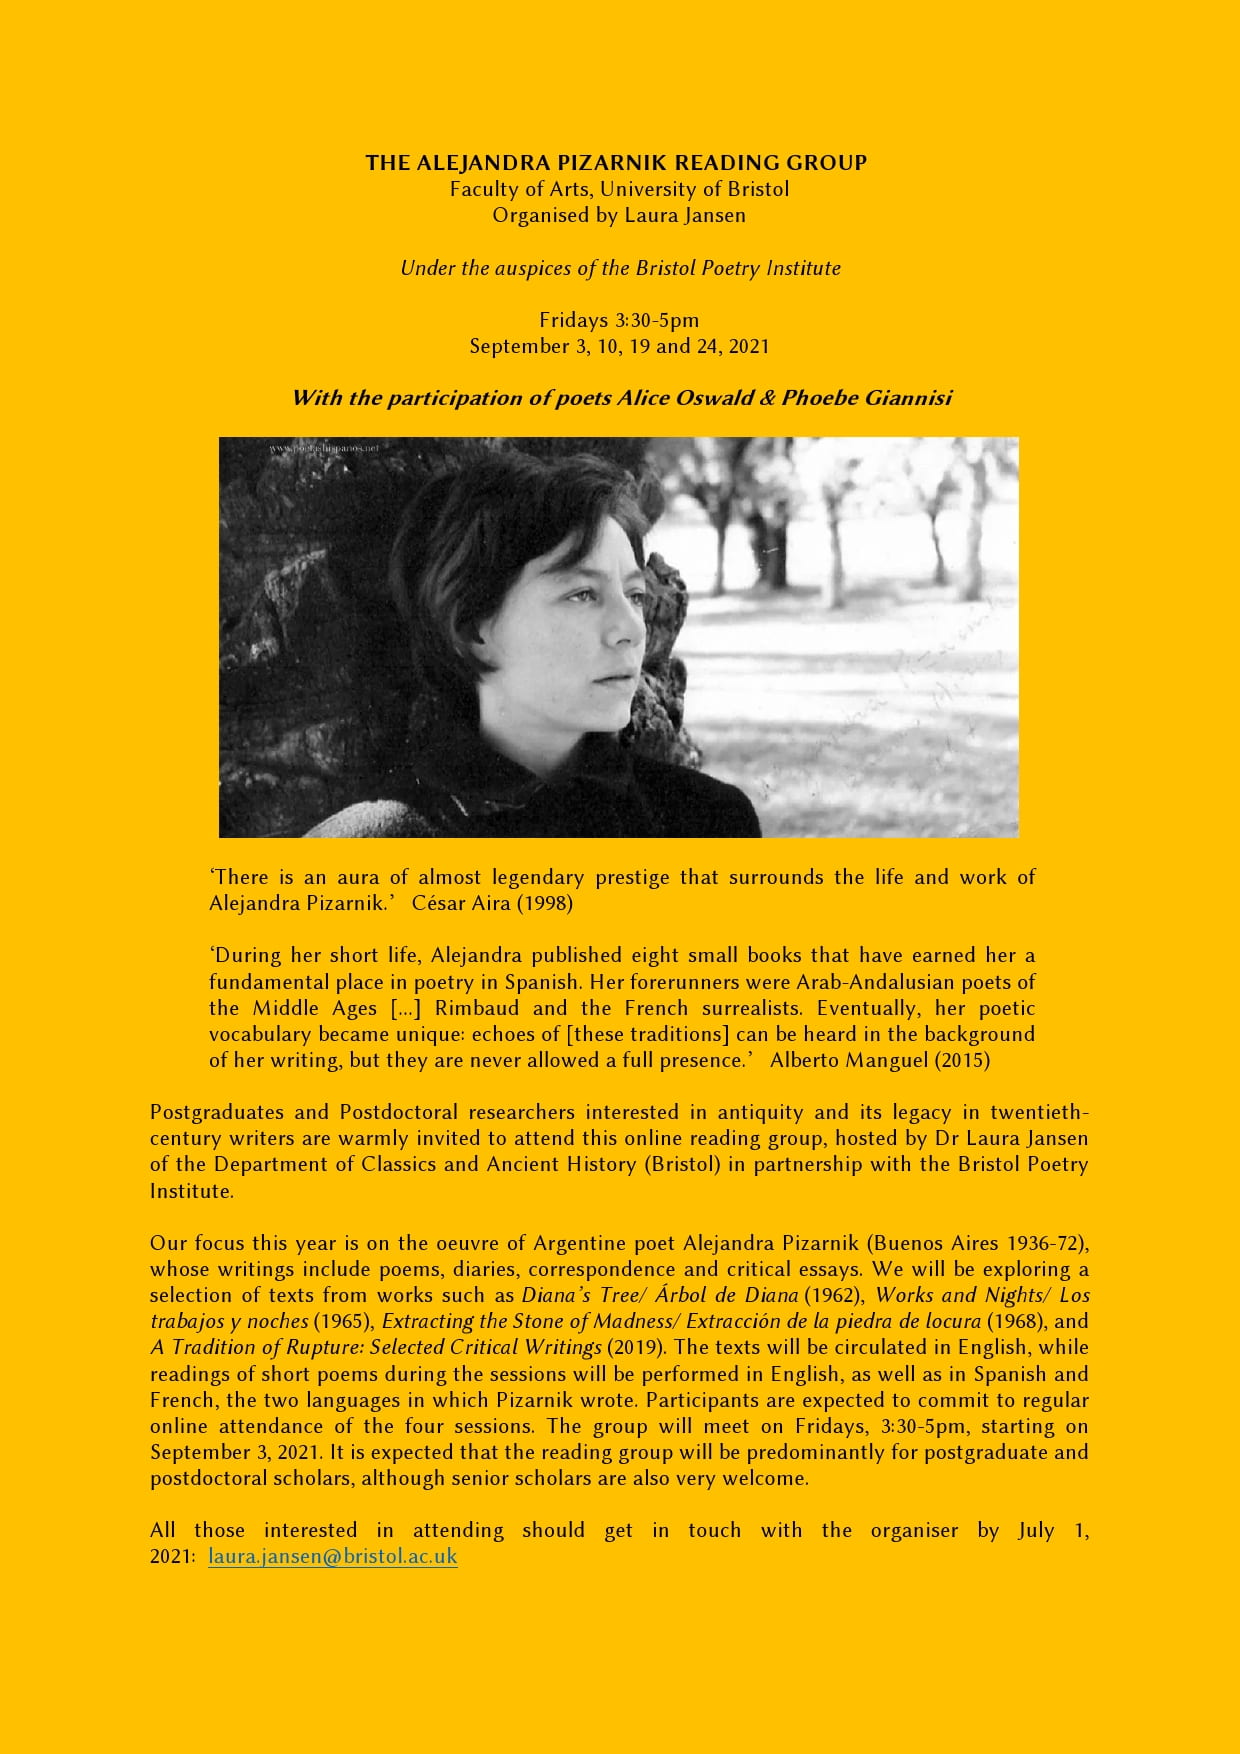 THE ALEJANDRA PIZARNIK READING GROUP Faculty of Arts Organised by Laura Jansen Under the auspices of the Bristol Poetry Institute Fridays 3:30-5pm September 3, 10, 19 and 24, 2021 With the participation of poets Alice Oswald & Phoebe Giannisi ‘There is an aura of almost legendary, classical prestige that surrounds the life and work of Alejandra Pizarnik.’ César Aira (1998) During her short life, Alejandra published eight small books that have earned her a fundamental place in poetry in Spanish. Her forerunners were classical Greek and Roman poets, Arab-Andalusian poets of the Middle Ages [...] Rimbaud and the French surrealists. Eventually, her poetic vocabulary became unique: echoes of [these traditions] can be heard in the background of her writing, but they are never allowed a full presence. Alberto Manguel (2015) Postgraduates and Postdoctoral researchers interested in twentieth-century writers are warmly invited to attend this online interdisciplinary reading group, hosted by Laura Jansen of the Department of Classics and Ancient History in partnership with the Bristol Poetry Institute. Our focus this year is on the oeuvre of Argentine poet Alejandra Pizarnik (Buenos Aires 1936-72), whose writings include poems, diaries, correspondence and critical essays. We will be exploring a selection of texts from works such as Diana’s Tree/ Árbol de Diana (1962), Works and Nights/ Los trabajos y noches (1965), Extracting the Stone of Madness/ Extracción de la piedra de locura (1968), and A Tradition of Rupture: Selected Critical Writings (2019). The texts will be circulated in English, while readings of short poems during the sessions will be performed in English, as well as in Spanish and French, the two languages in which Pizarnik wrote. Participants are expected to commit to regular online attendance of the four sessions. The group will meet on Fridays, 3:30-5pm, starting on September 3, 2021. It is expected that the reading group will be predominantly for postgraduate and postdoctoral scholars, although senior scholars are also very welcome. All those interested in attending should get in touch with the organiser by July 1, 2021: laura.jansen@bristol.ac.uk